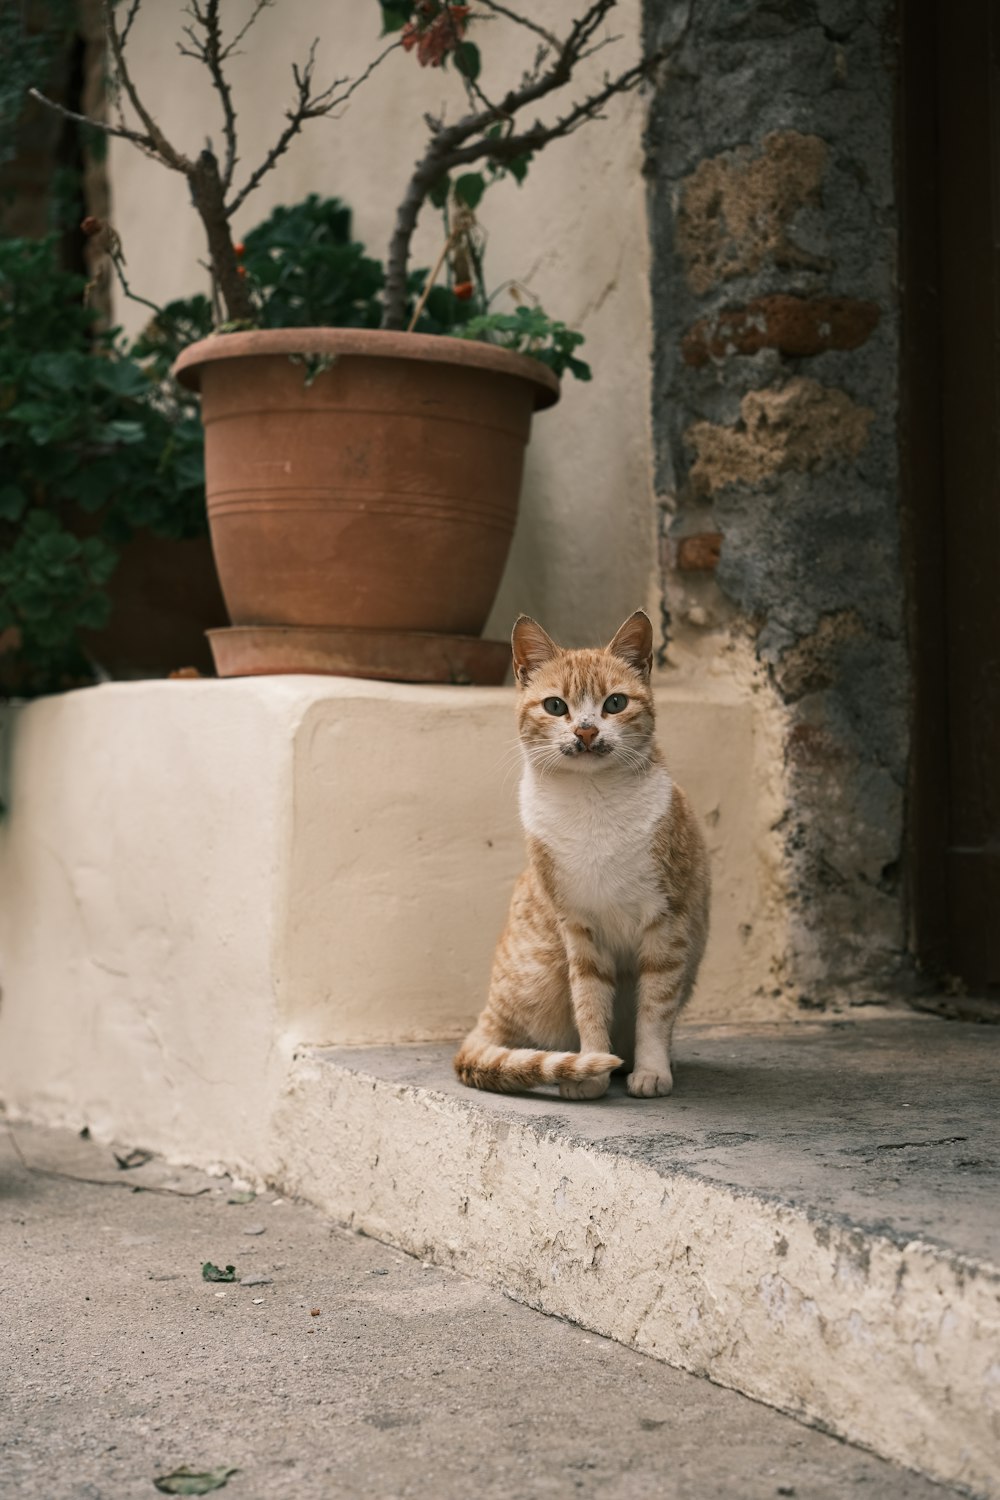 a cat sitting on a ledge next to a potted plant